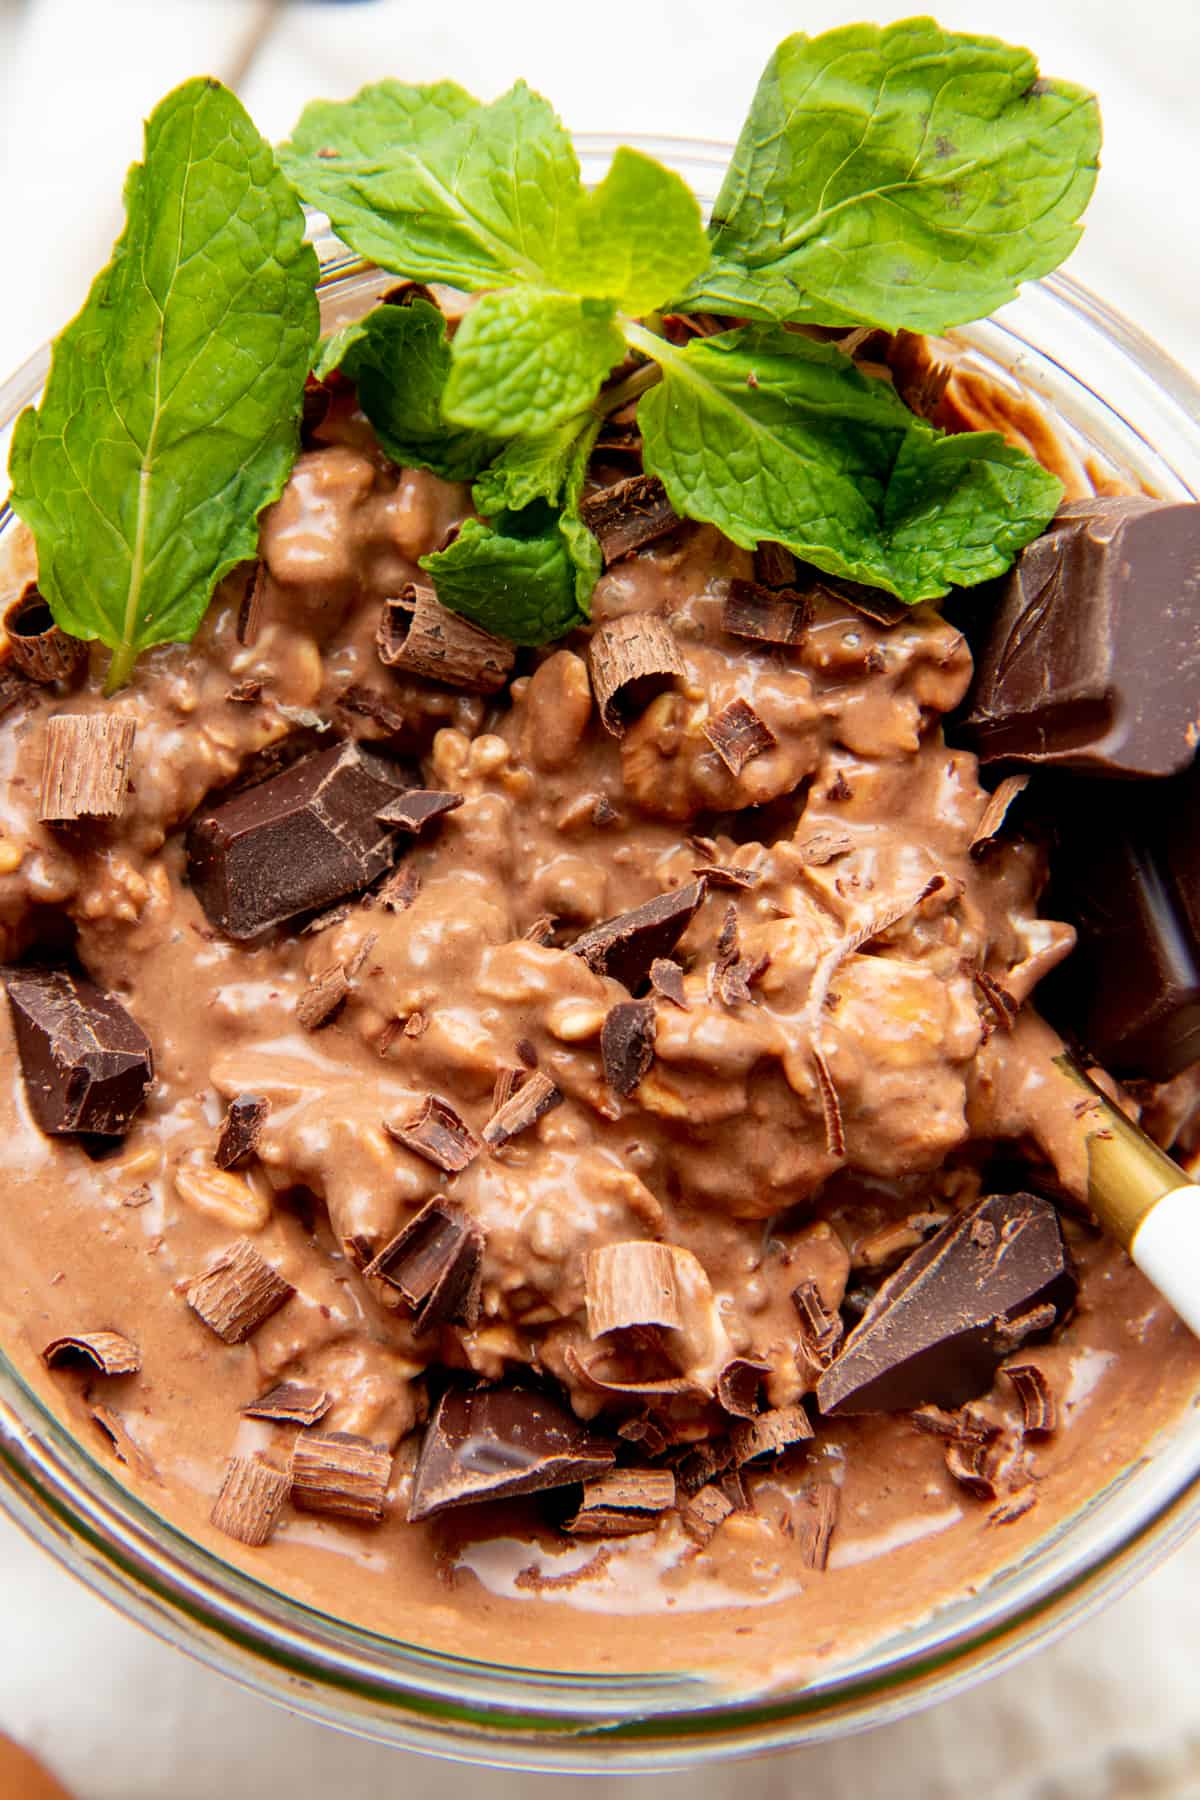 Overnight oats fill a glass jar. Chopped chocolate and mint leaves accent the top.